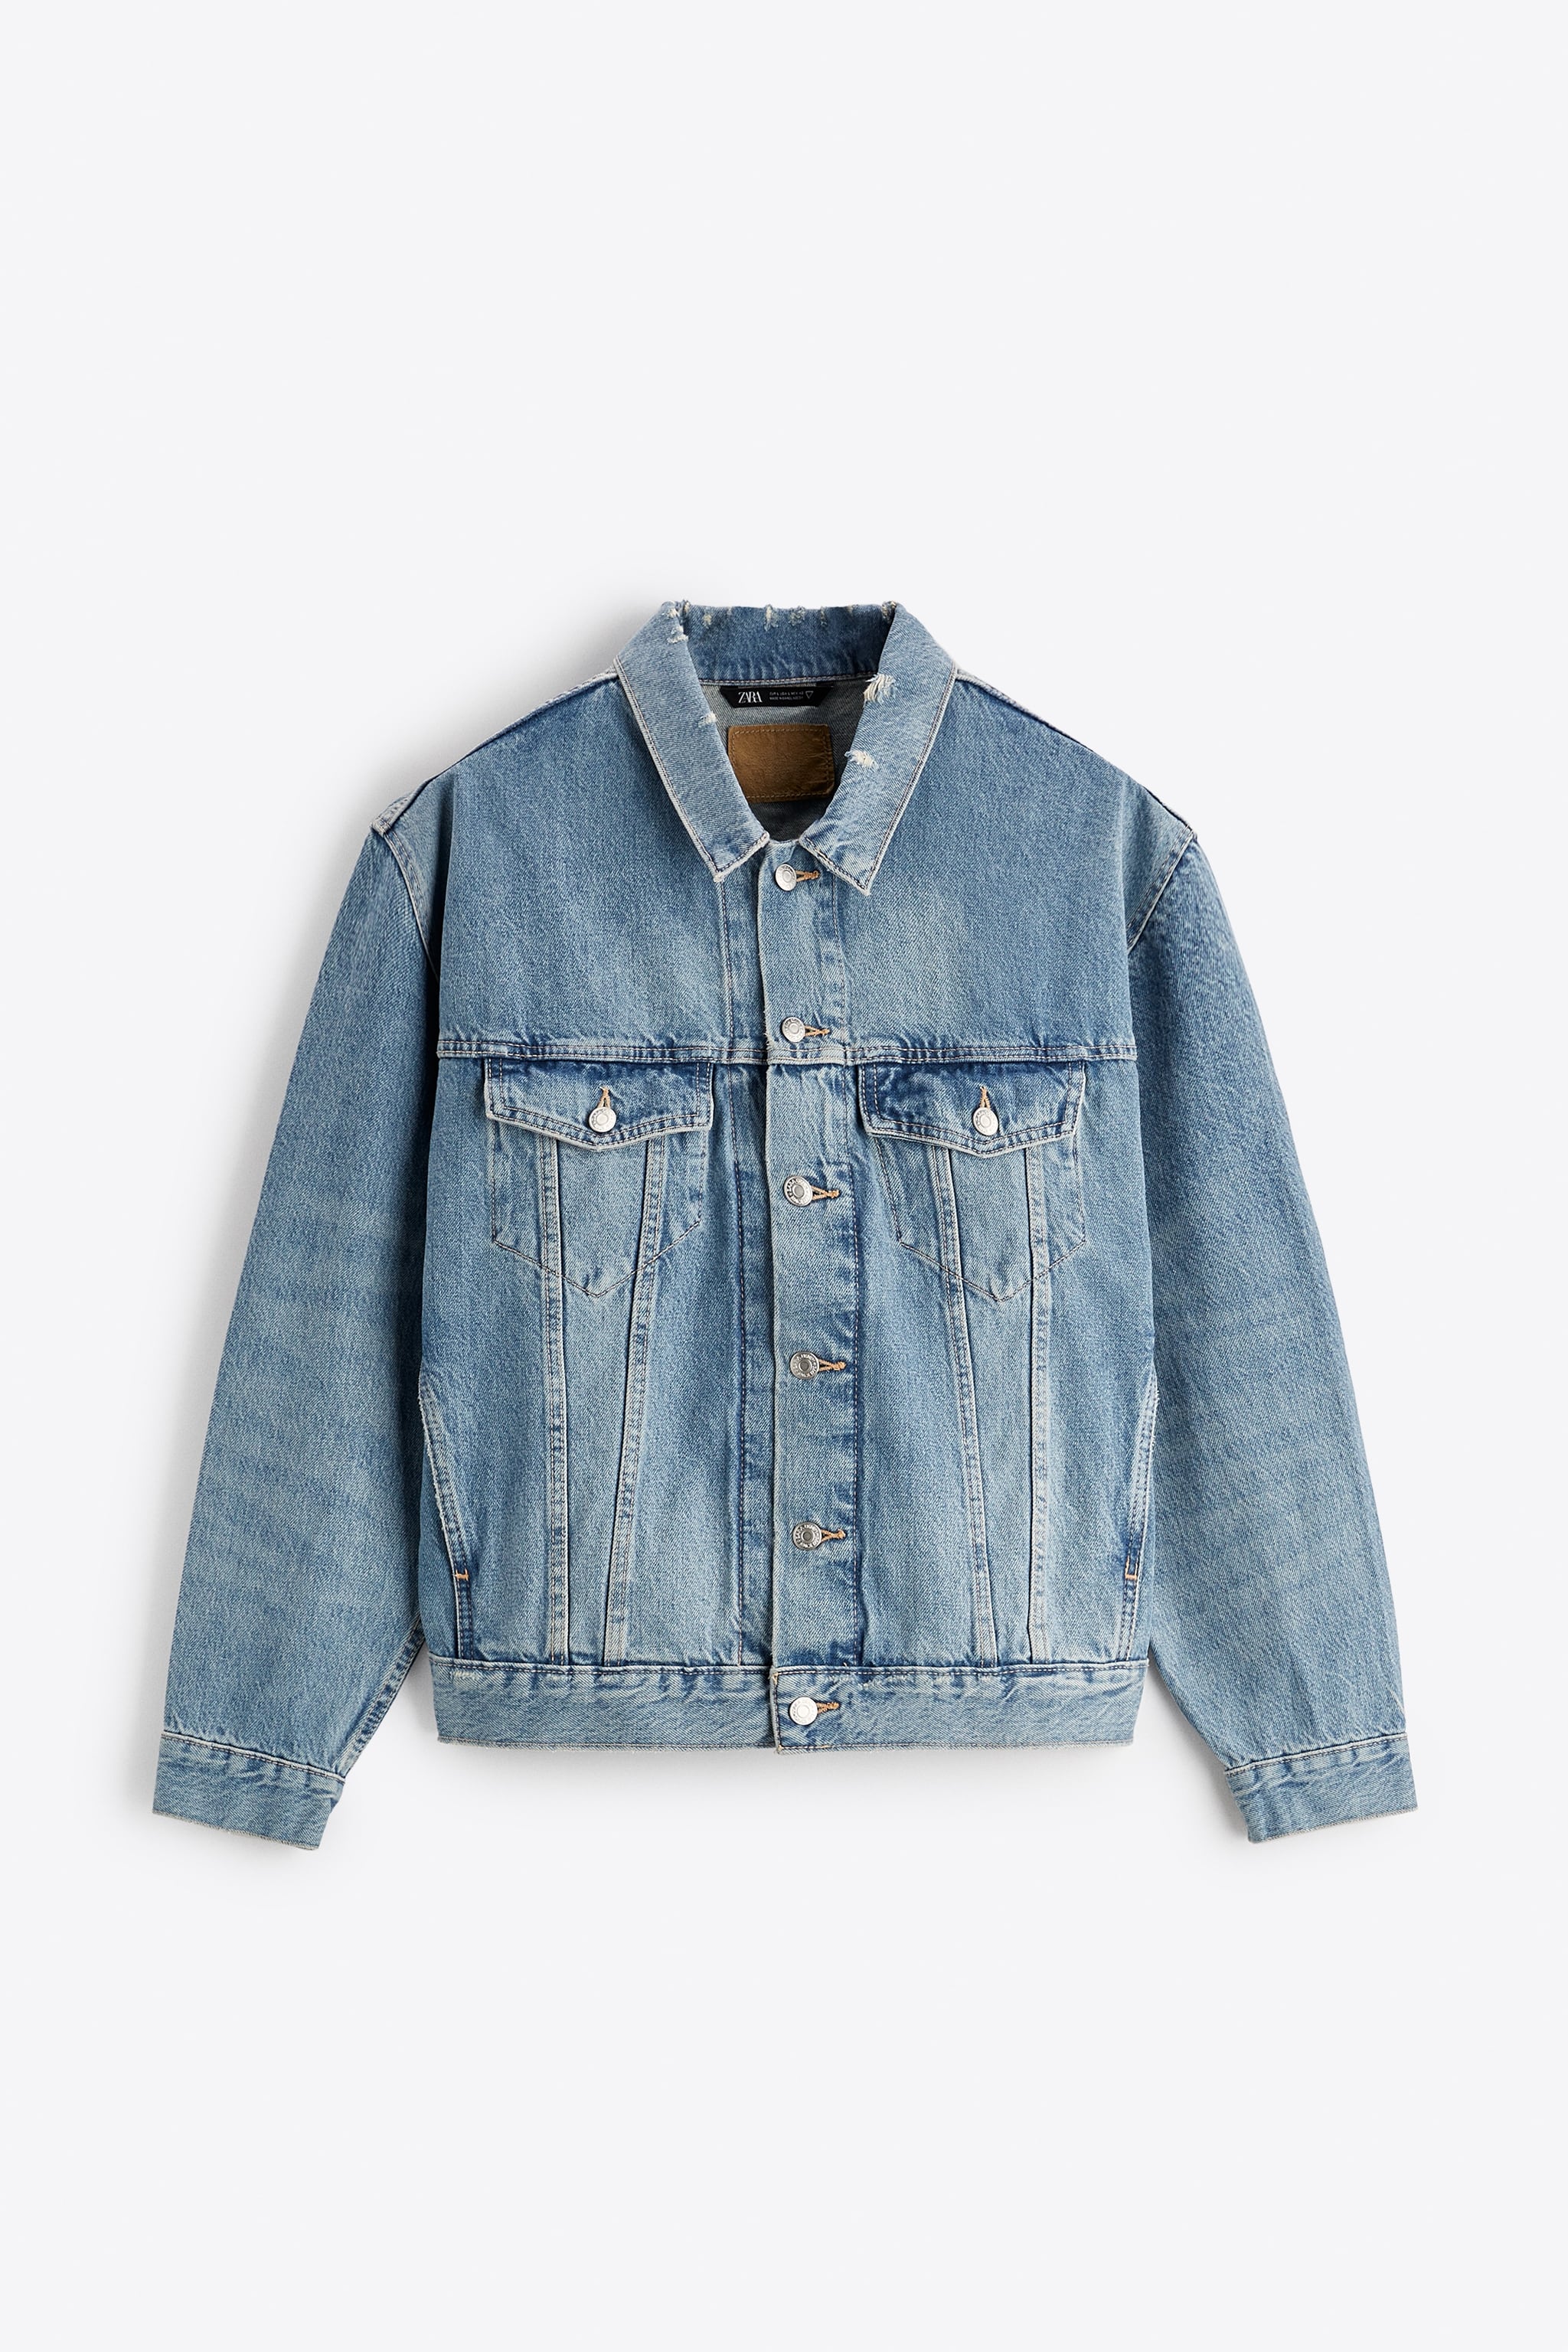 Zara RELAXED CROPPED DENIM JACKET | Square One